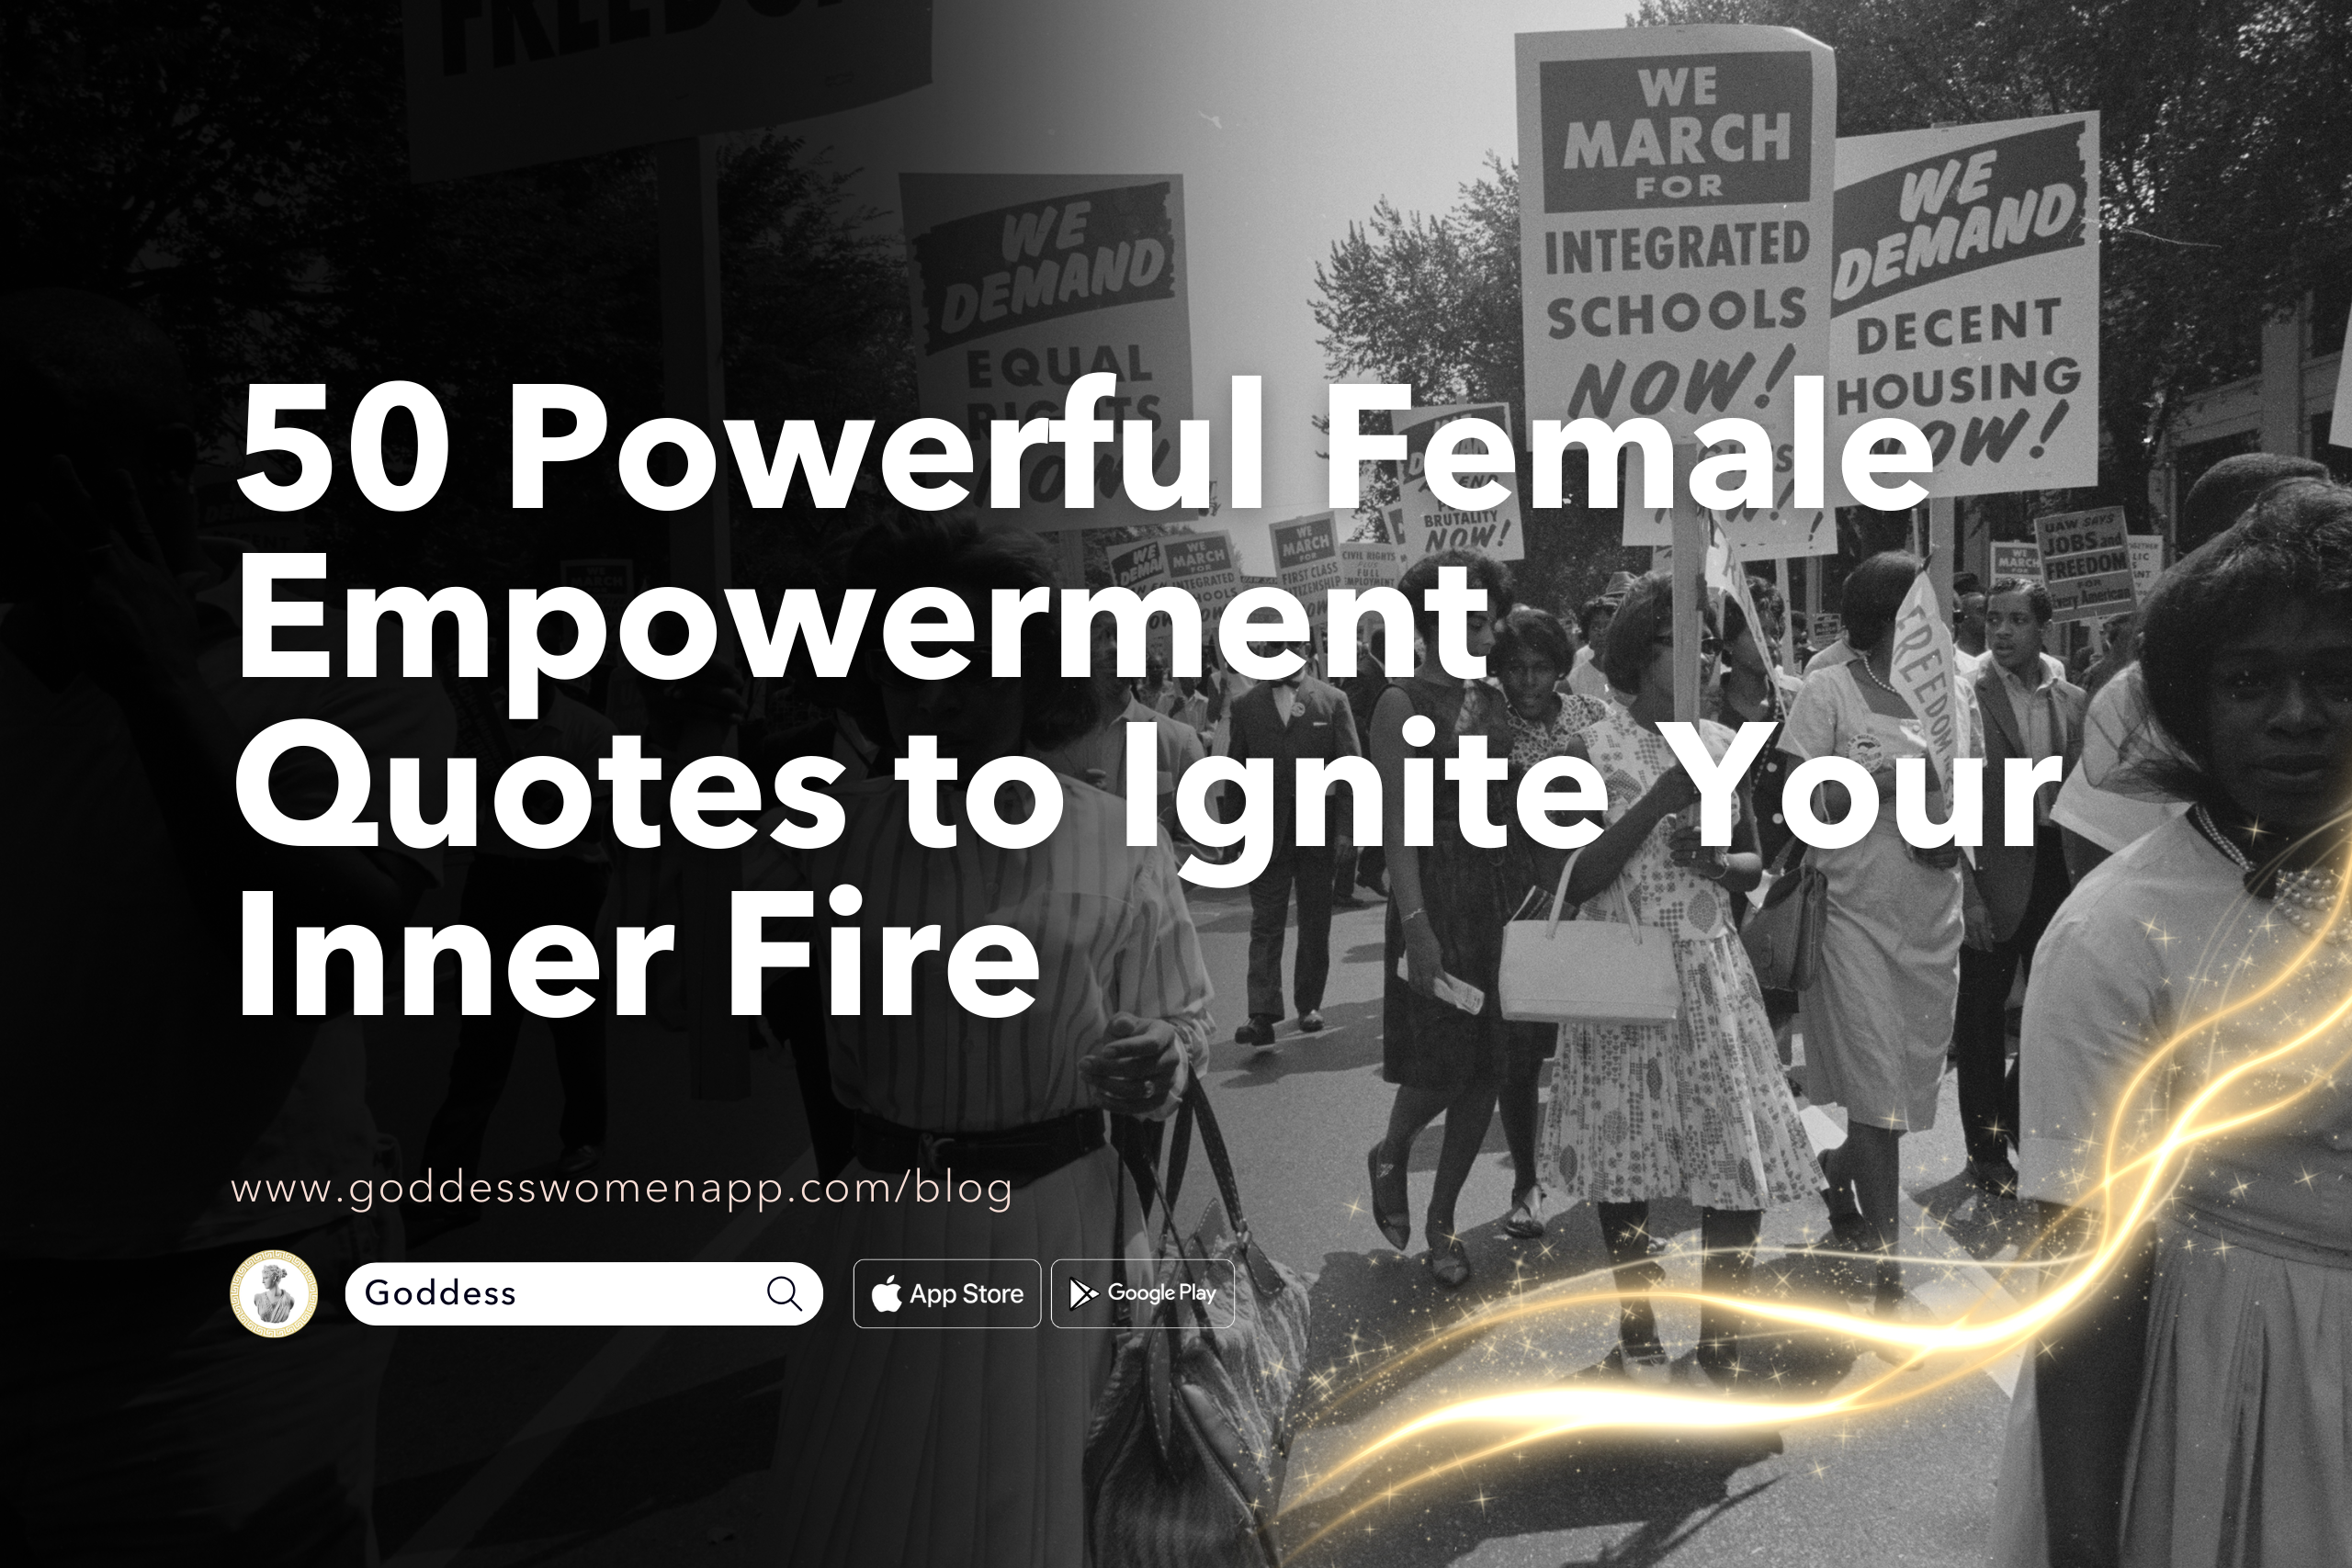 50 Powerful Female Empowerment Quotes to Ignite Your Inner Fire